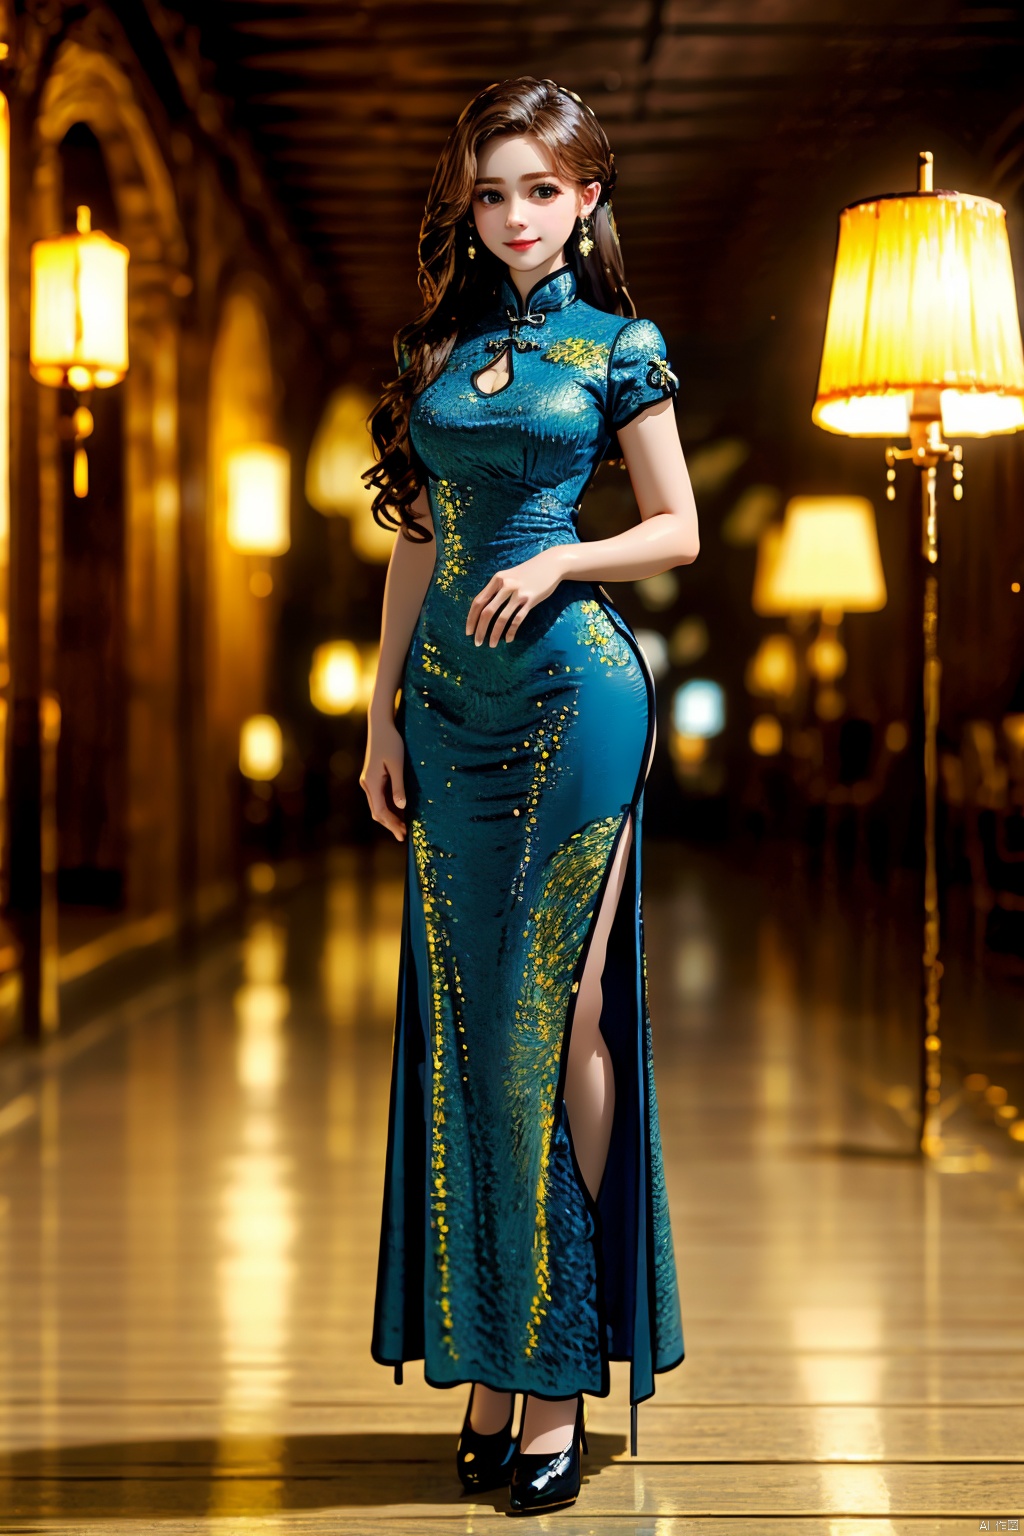 (Global lighting, realism, ray tracing, HDR, rendering, reasonable design, high detail, masterpiece, best quality, ultra-high definition, movie lighting), 1 girl, looking at the audience, Chinese long dress (qipao), qipao pattern (Van Gogh's starry sky), accessories, necklaces, earrings, crystals, jewelry, playful posture, smile, full body, slender legs, young girl's body proportion, depth of field, blurred background, Chinese architectural interior, Chinese style, (high quality), best quality, (masterpiece), blurry background, rich colors, fine details, surrealism, 50mm lens, relaxed atmosphere. Portrait photography, 35mm film, naturally blurry, ((poakl)),  , cute girl